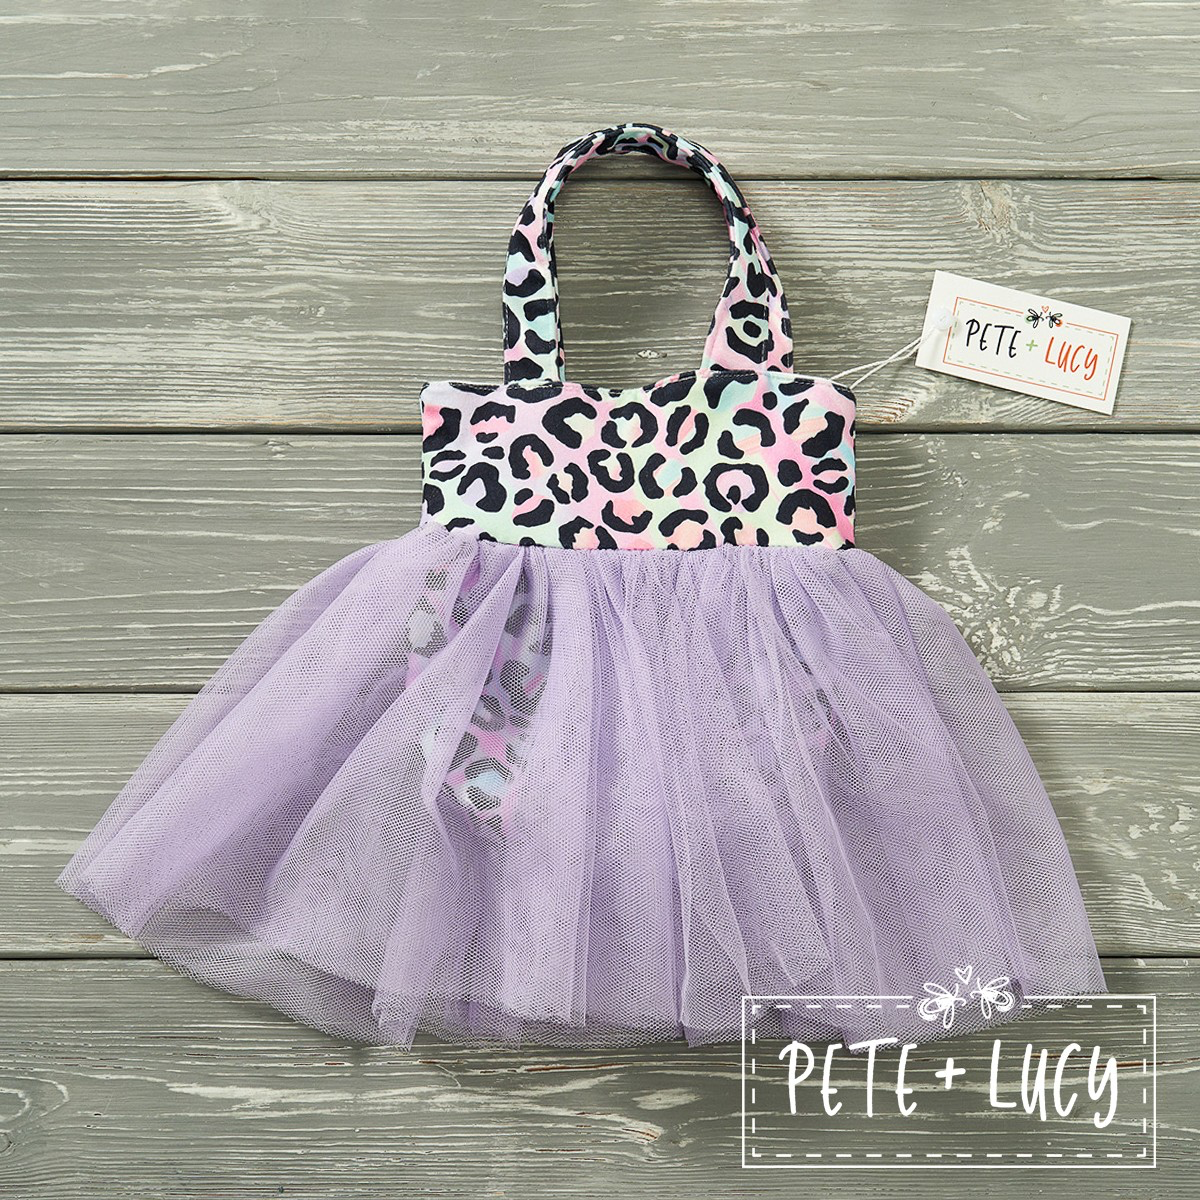 Lisa’s Bucket Tulle Purse by Pete and Lucy